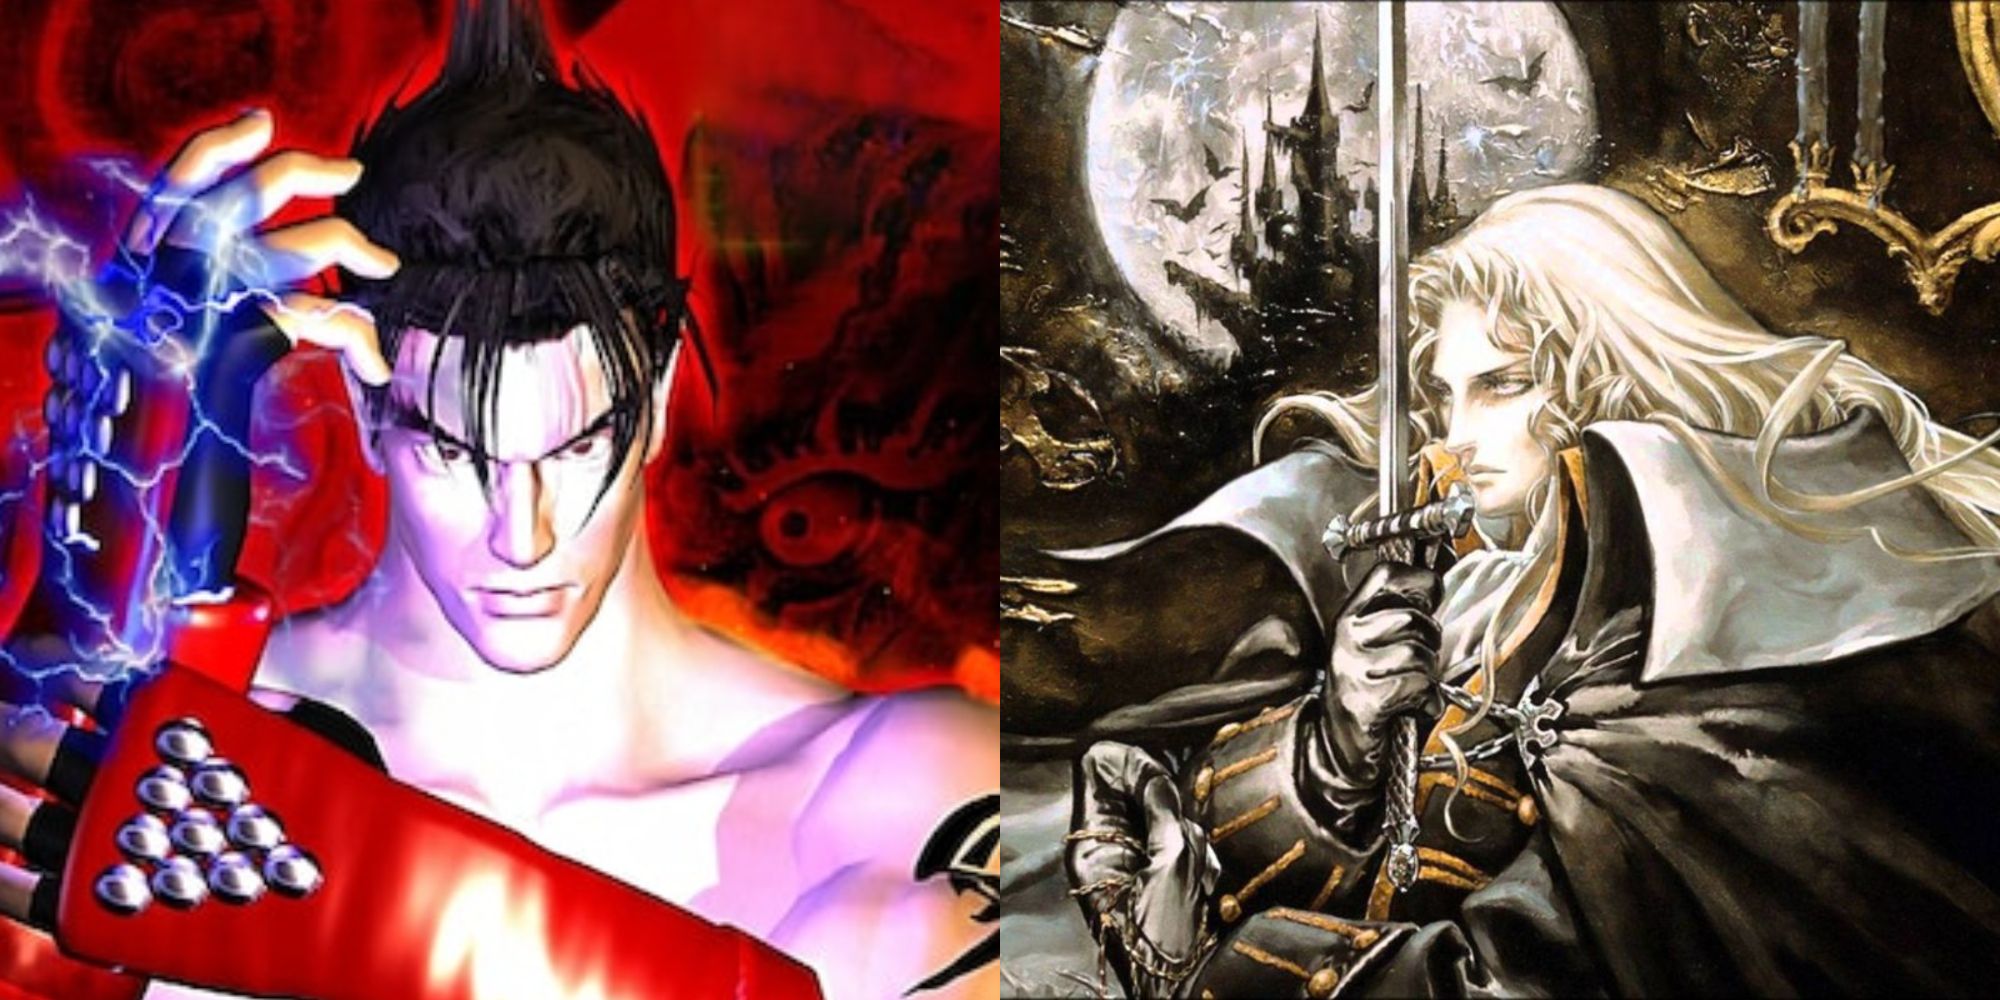 Split images of Jin Kazama in Tekken 3 and a man with a sword in Castlevania